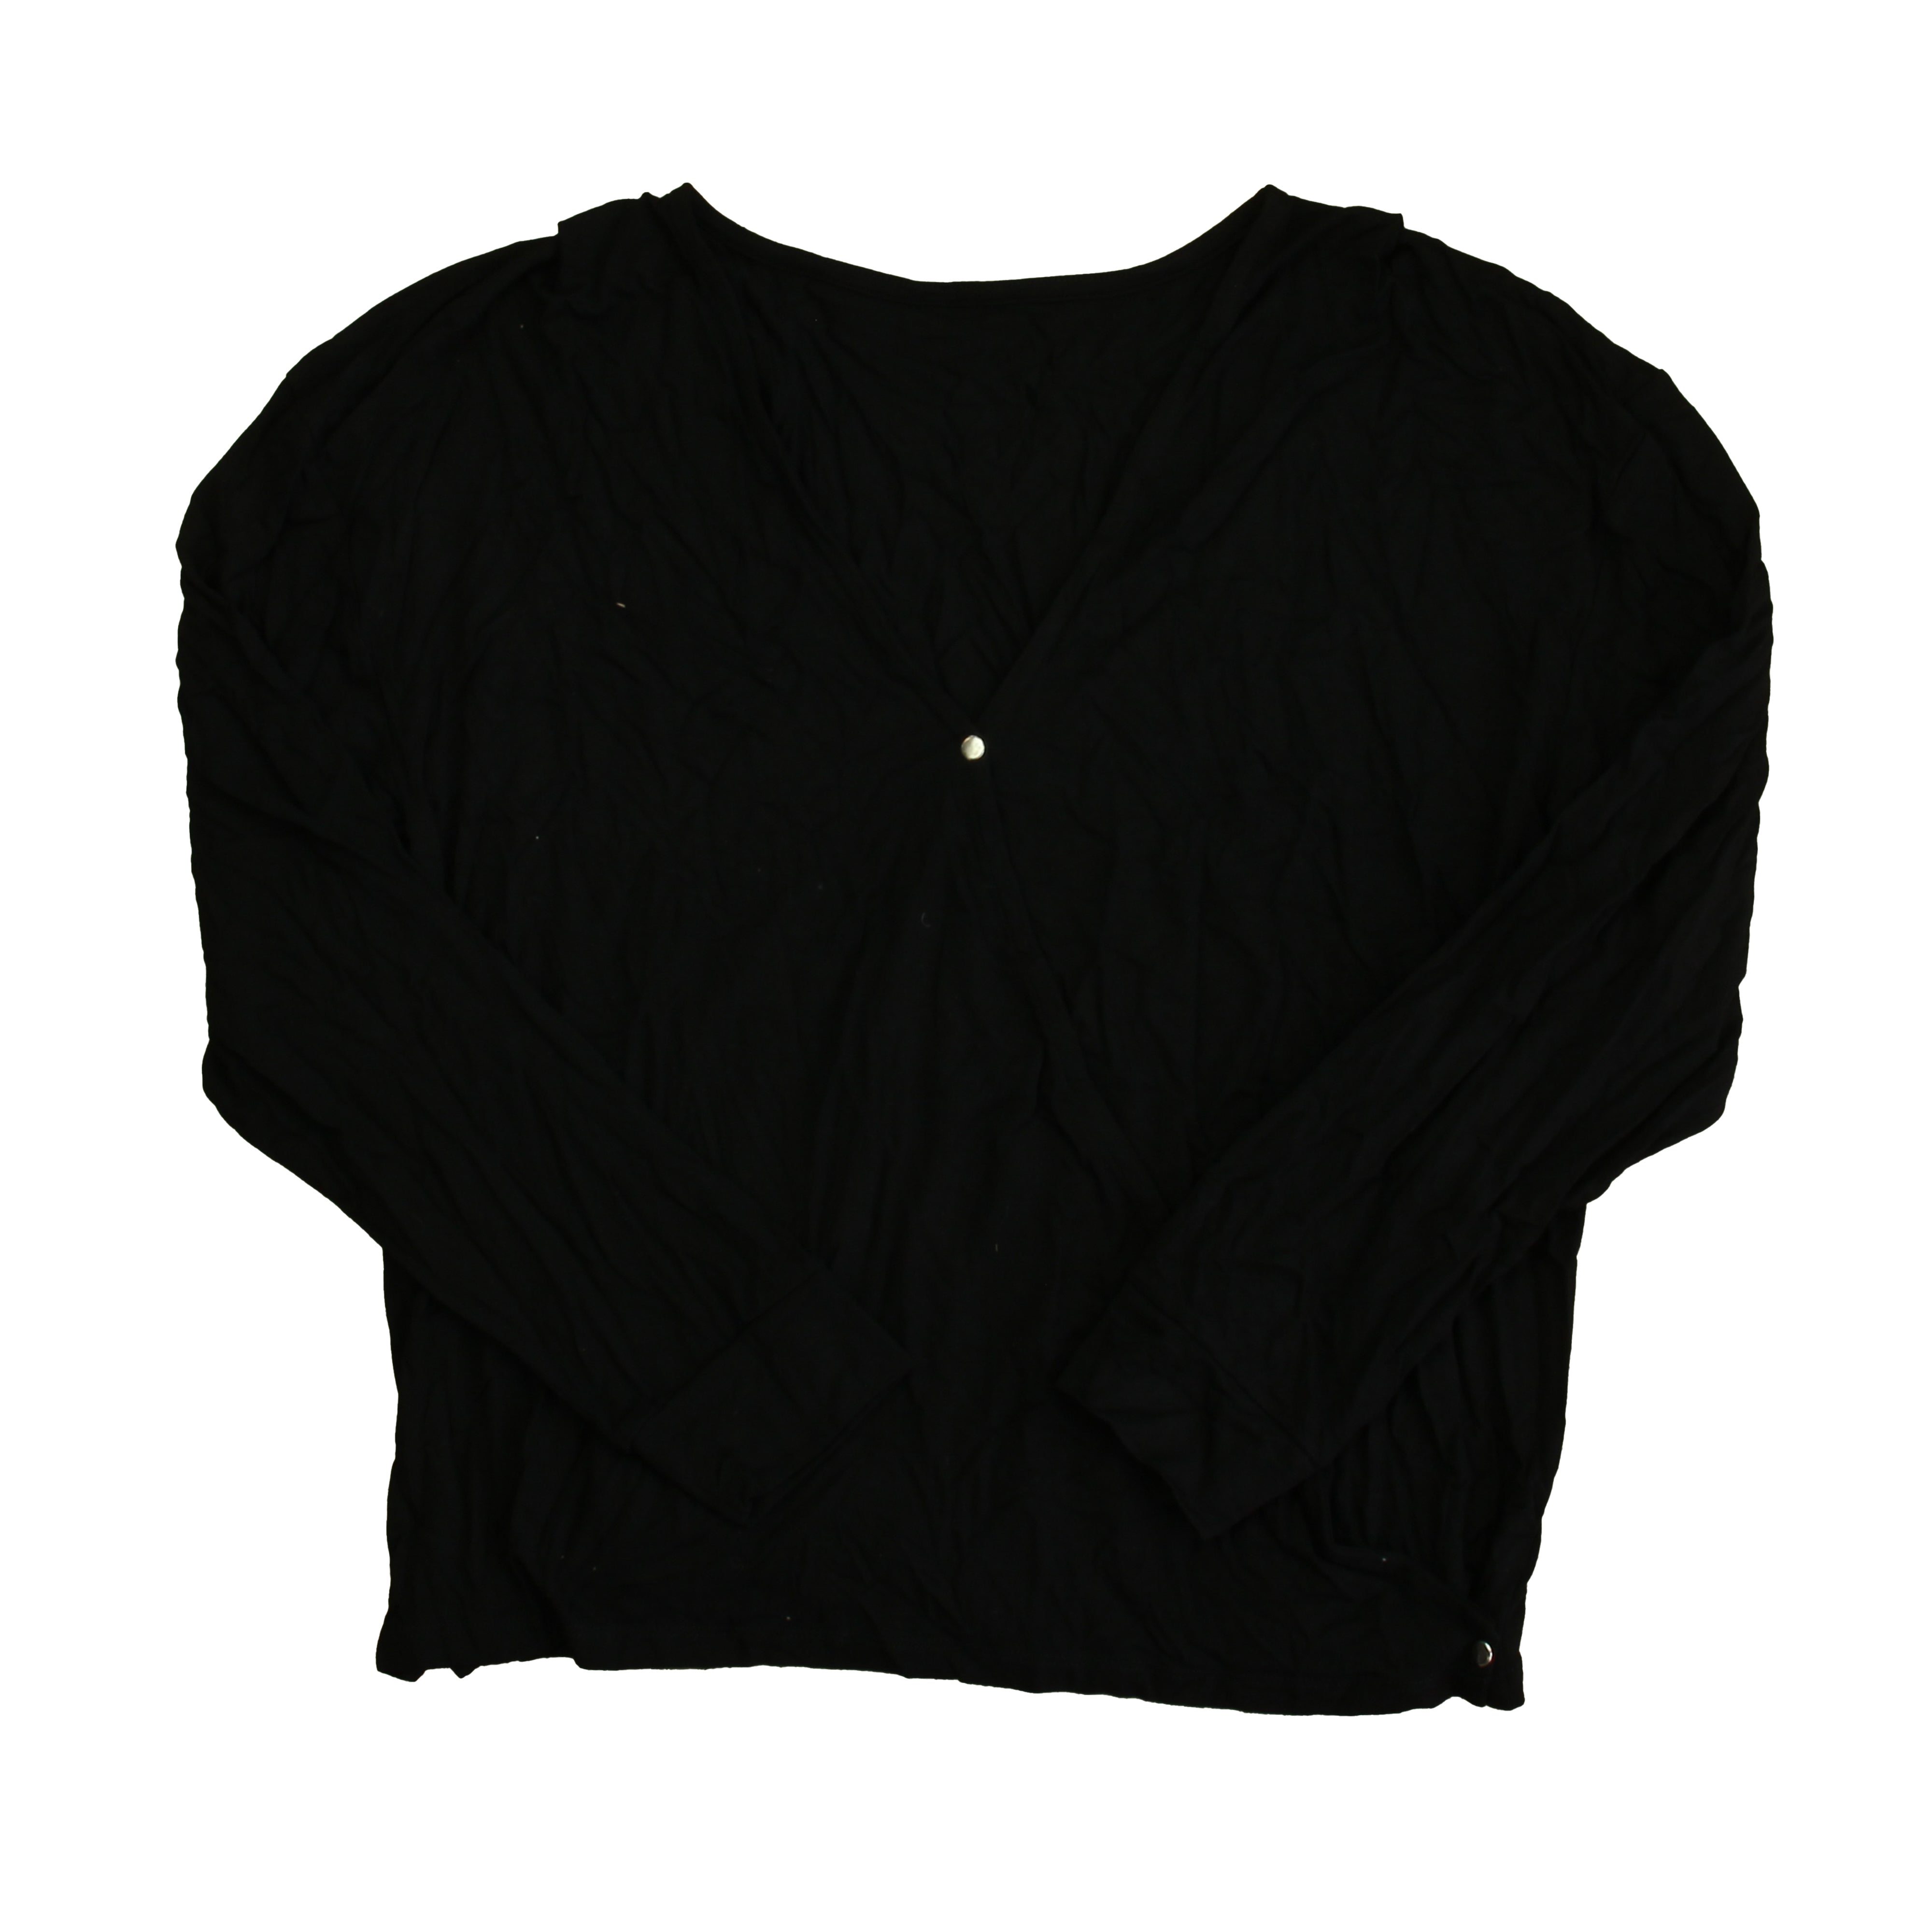 Pre-owned Black Long Sleeve Tee size: Adult XS-XL